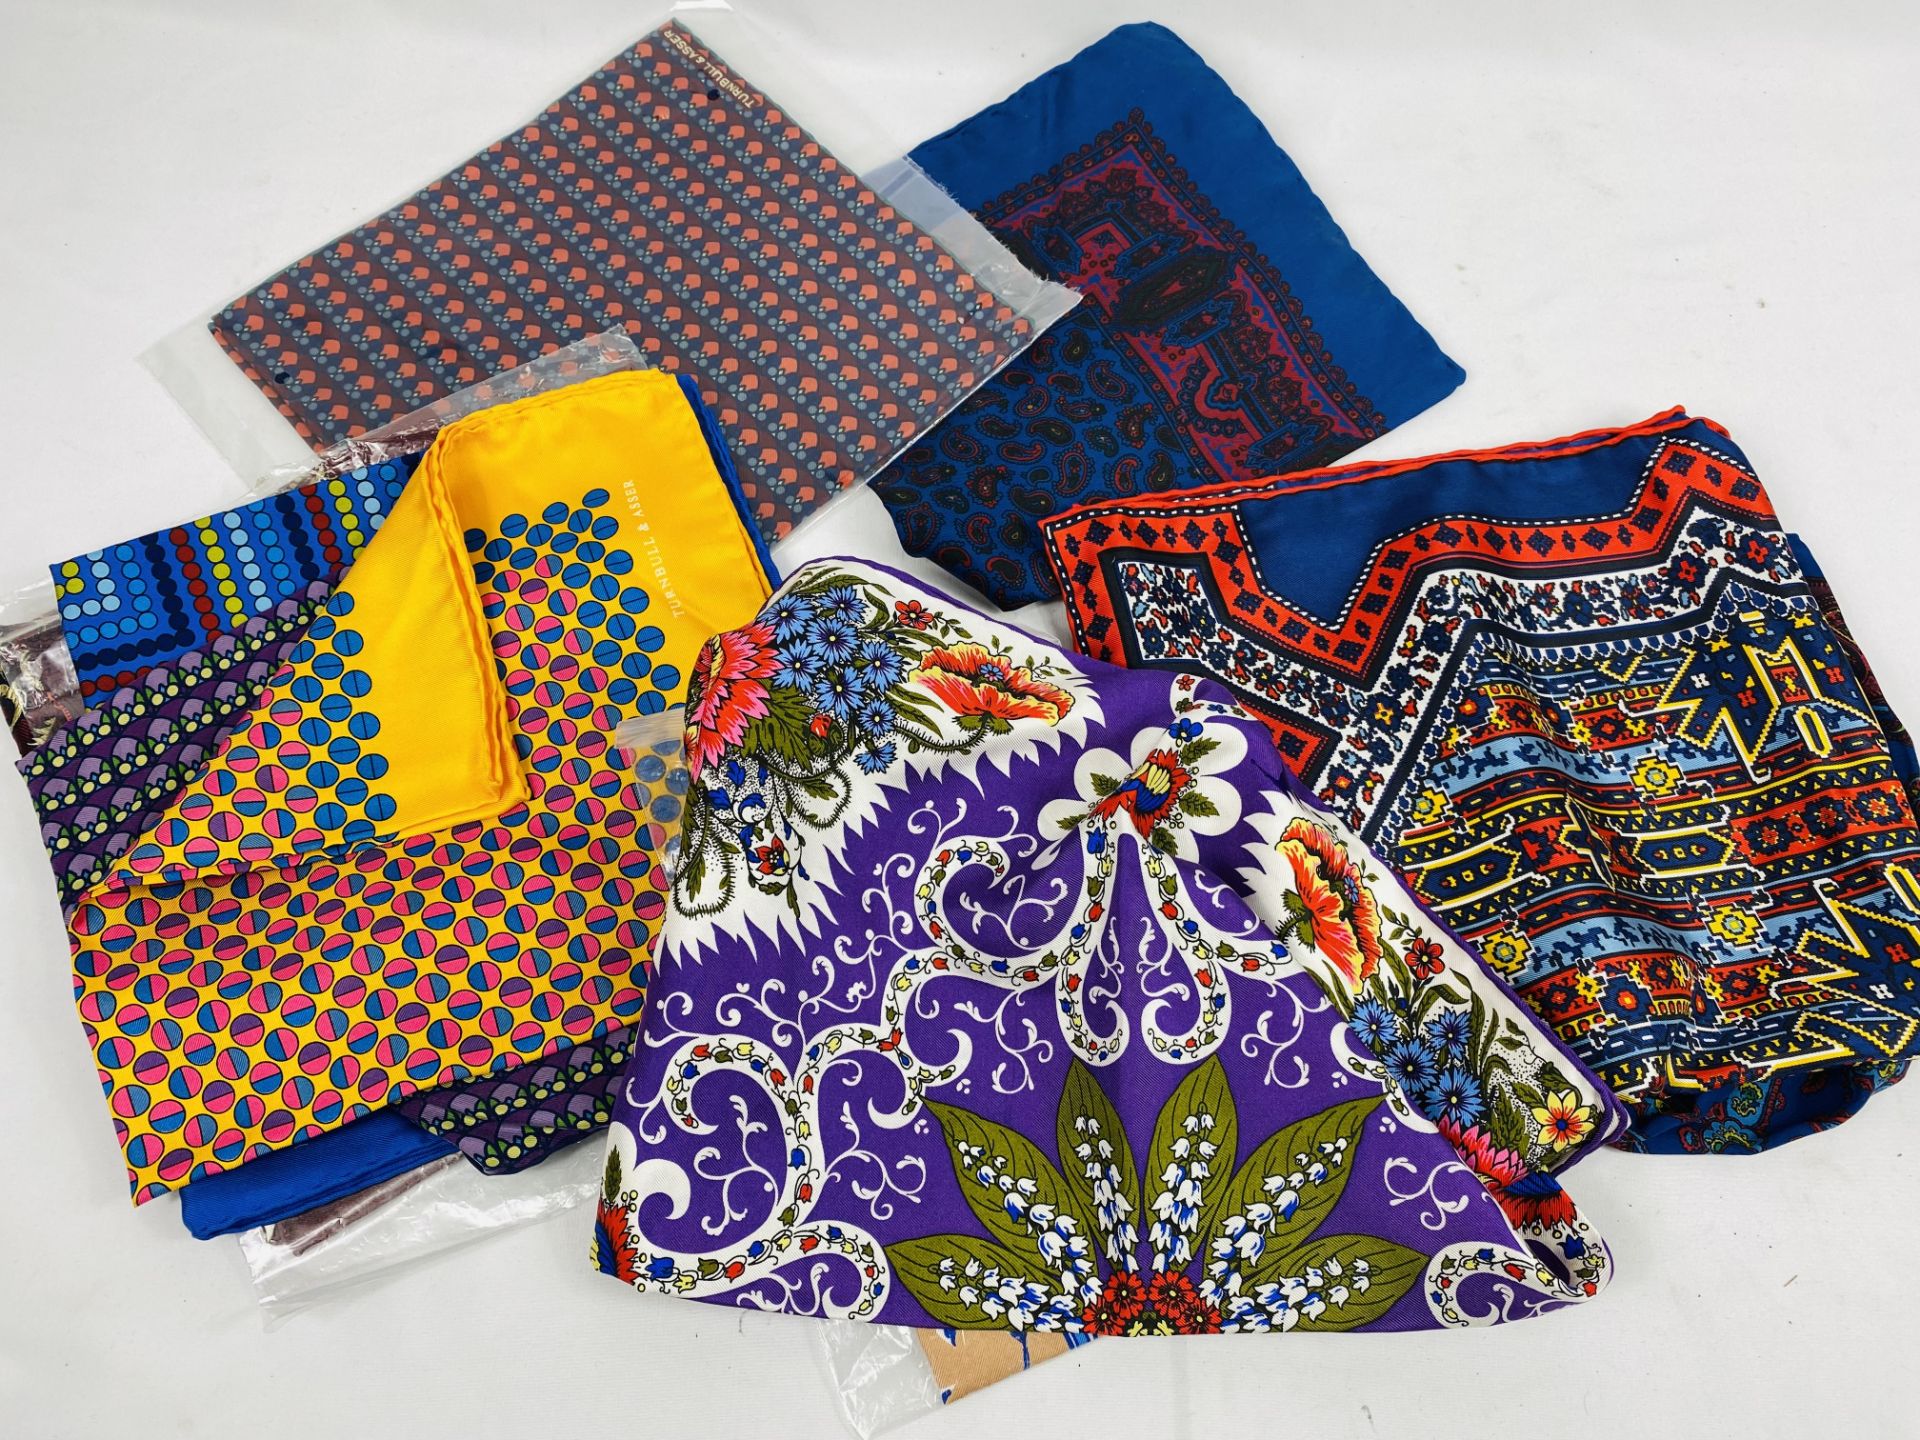 Ten Turnbull and Asser silk pocket squares.